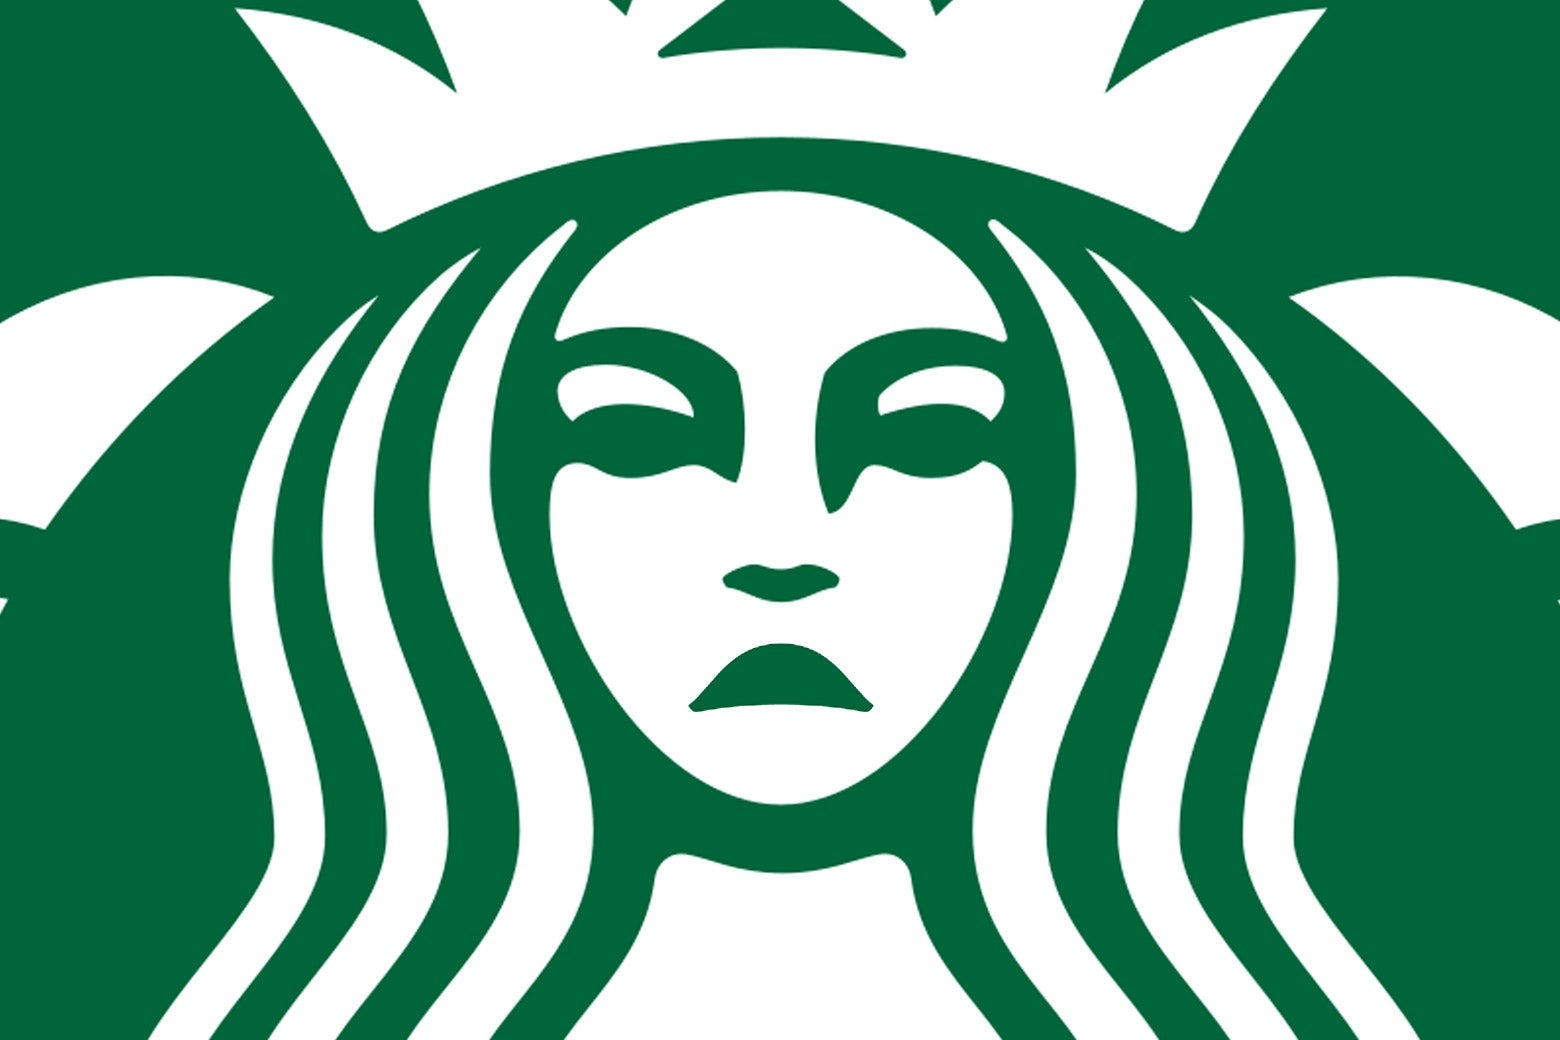 The Starbucks logo mermaid edited to have a frowning face.